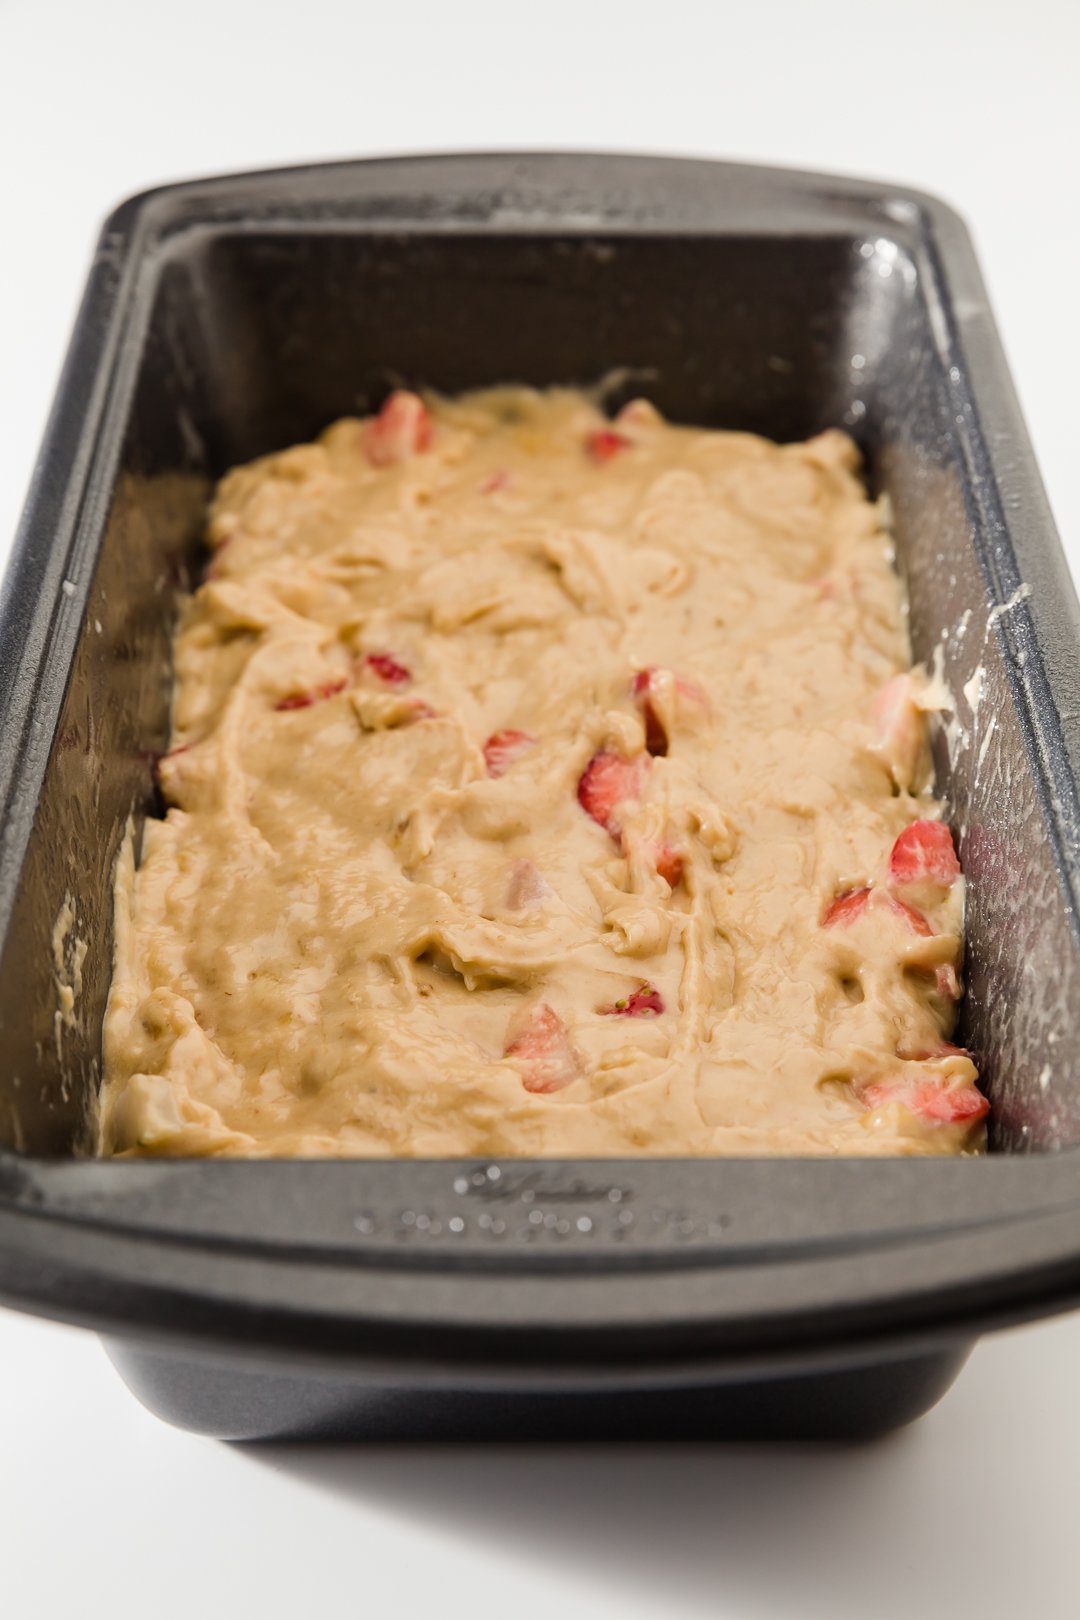 Strawberry banana bread batter in loaf pan